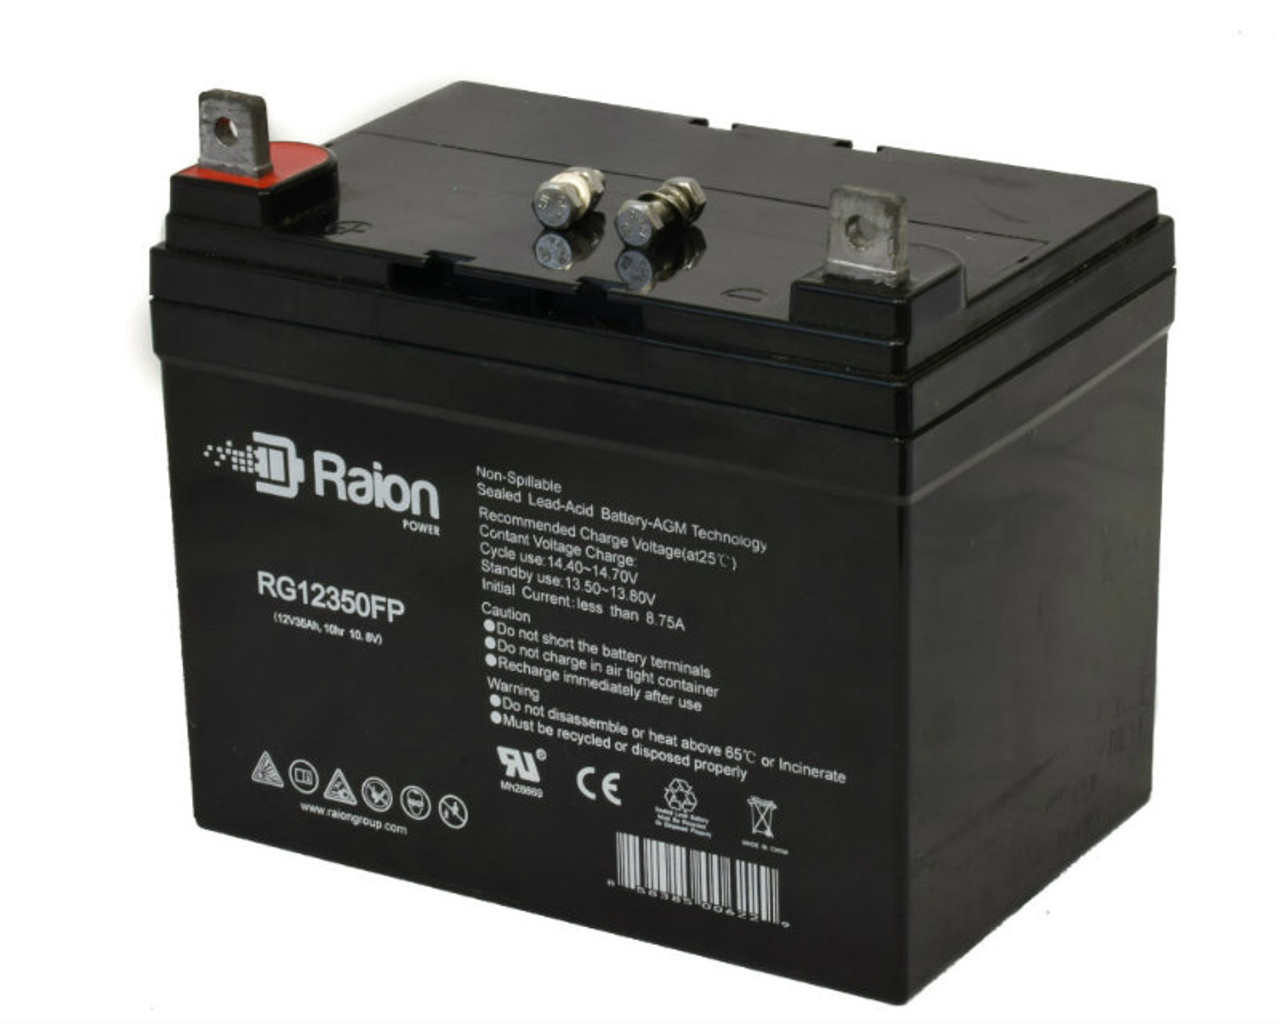 Raion Power Replacement 12V 35Ah RG12350FP Mobility Scooter Battery for Pride Mobility Jazzy 610